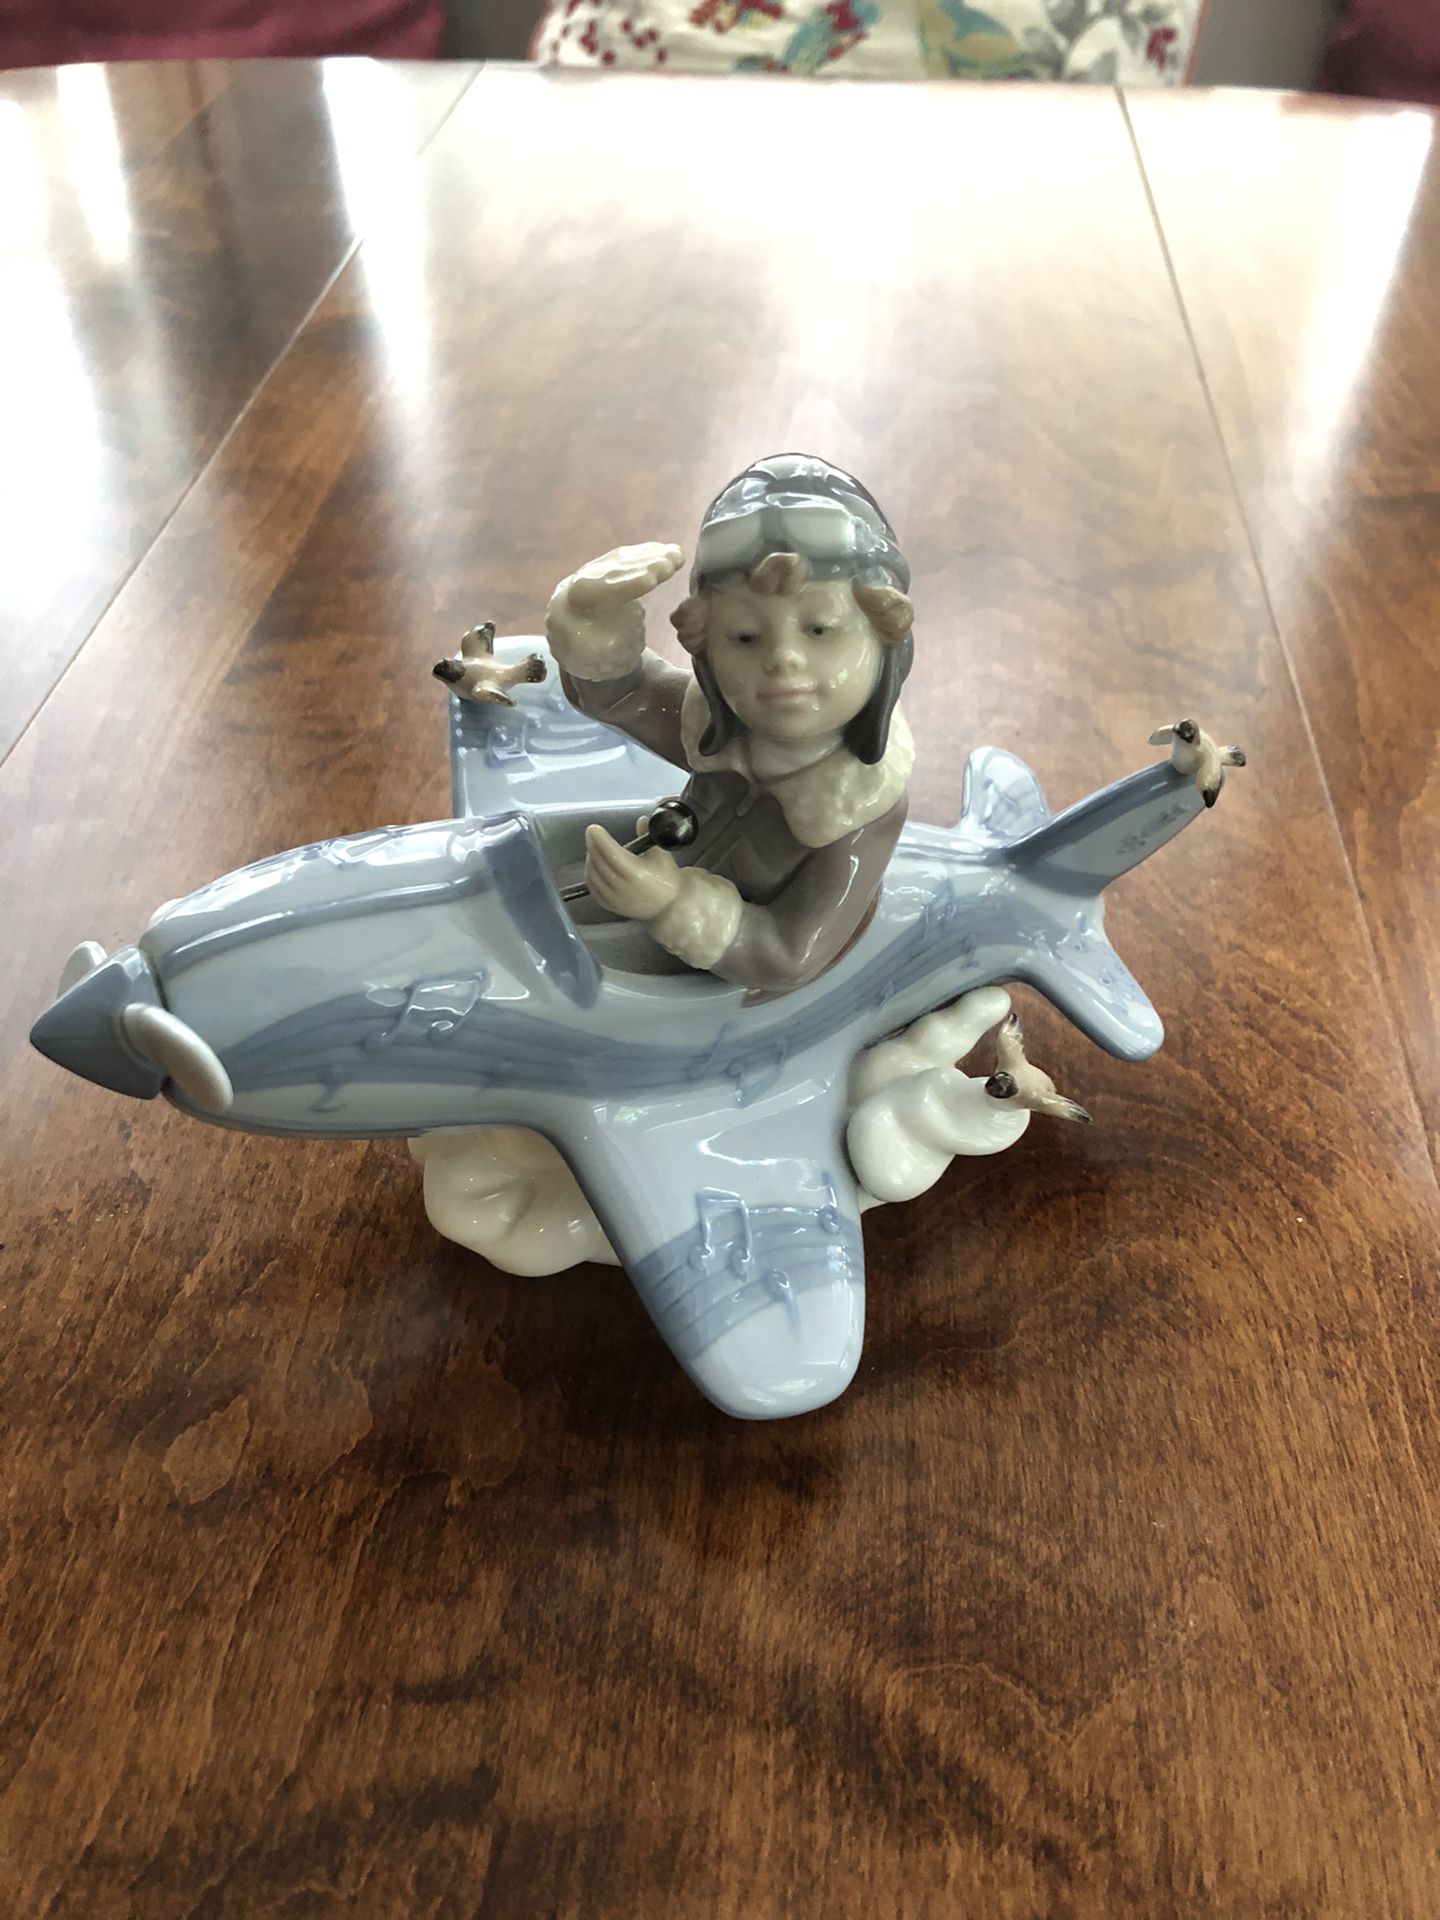 Lladro Figurine “Over the Clouds” Blue Boy Airplane Porcelain 5697 Mint Condition